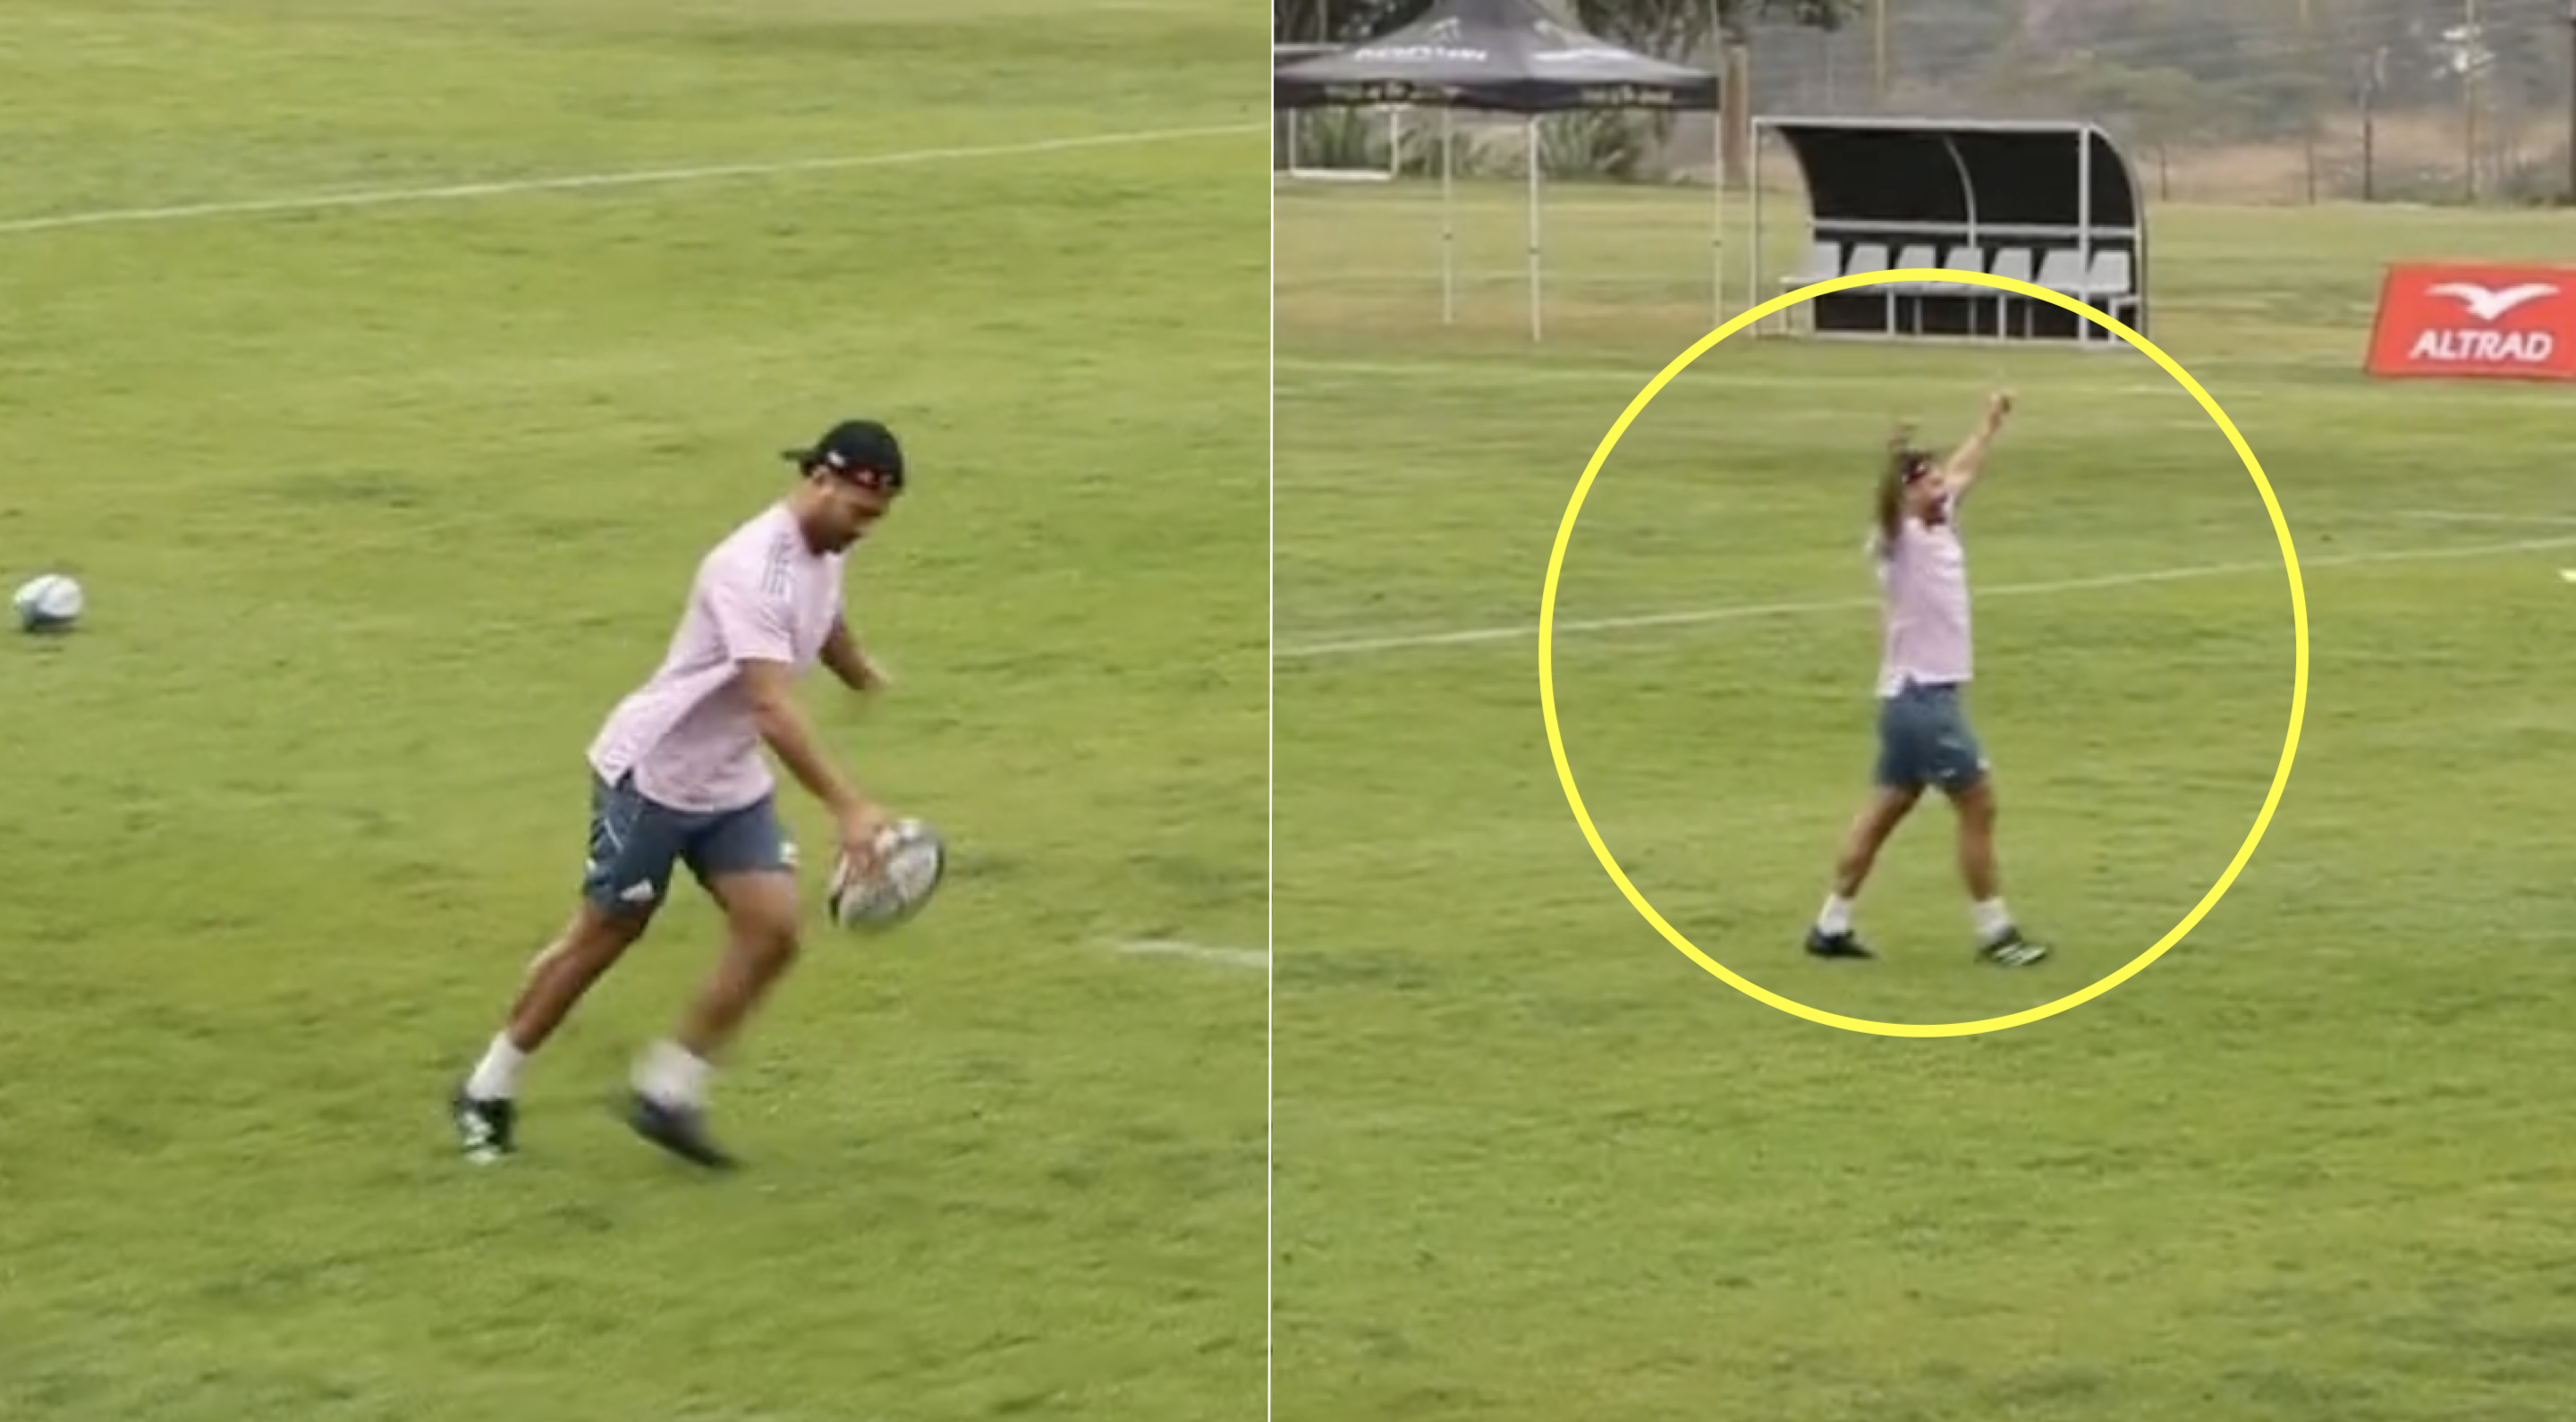 Mo'unga stakes claim to be world's best kicker with trick shot